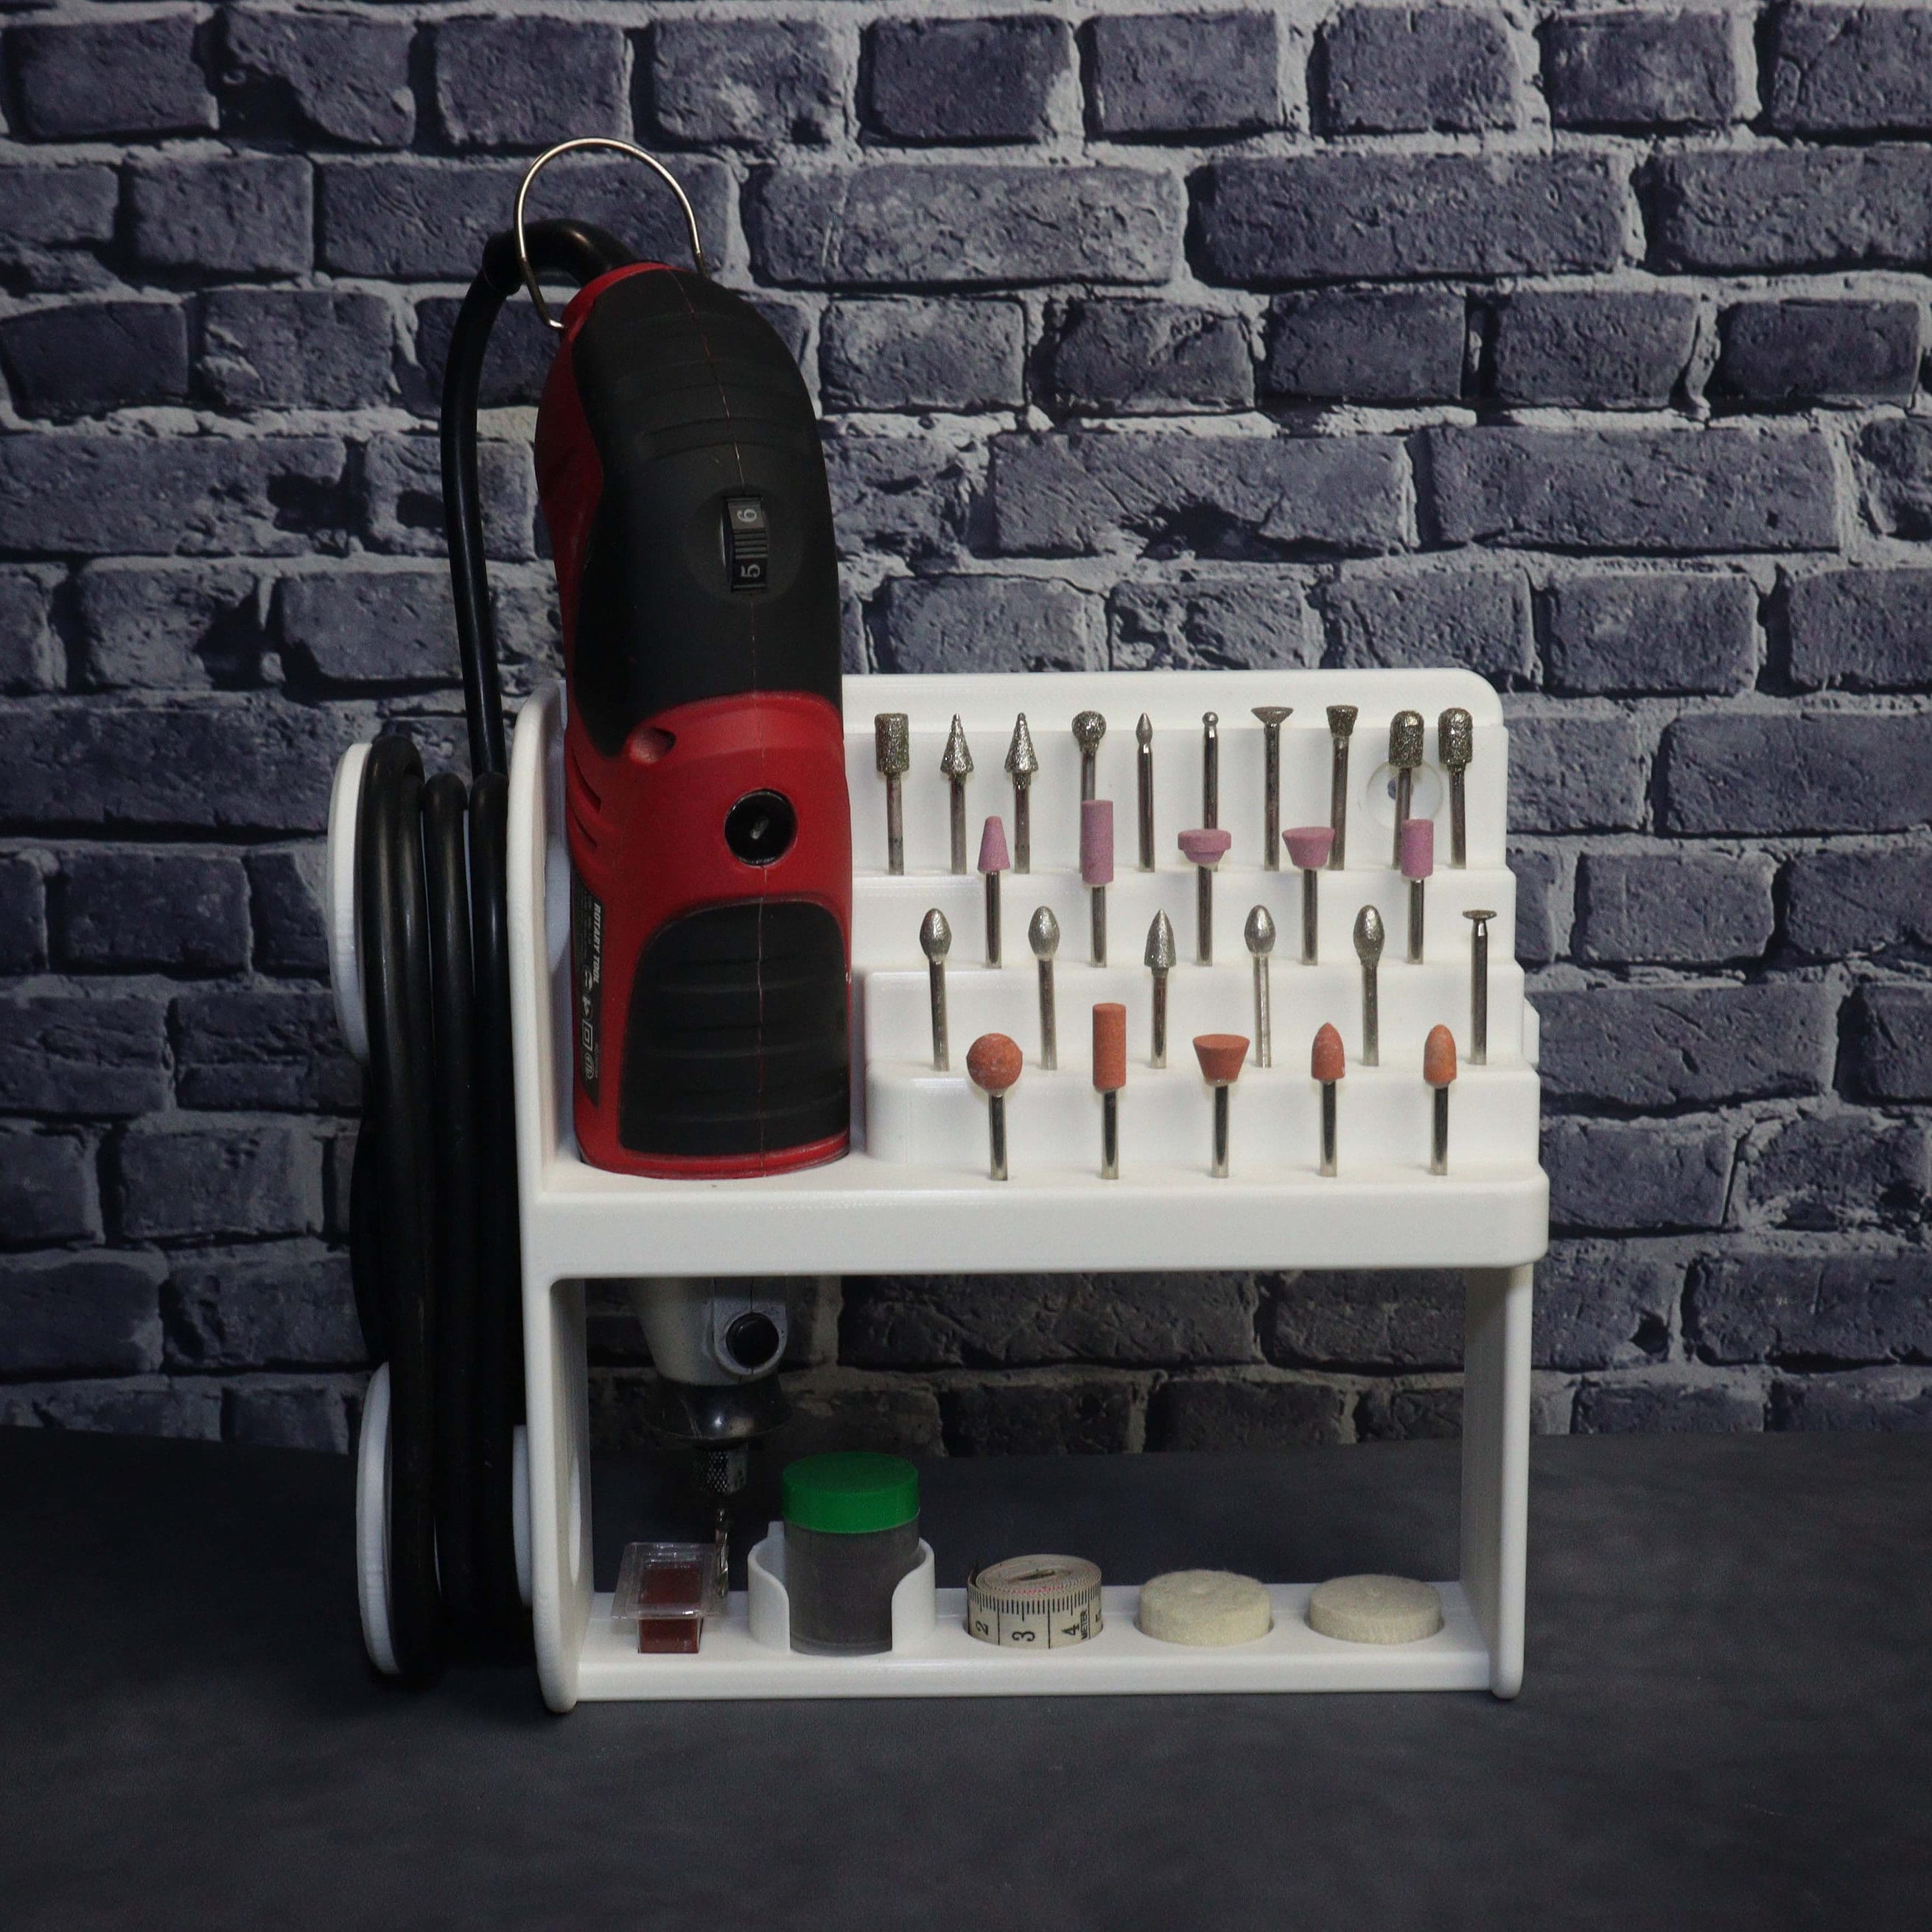 Wall-mounted Hanger / Storage Solution for Dremel Rotary Tool